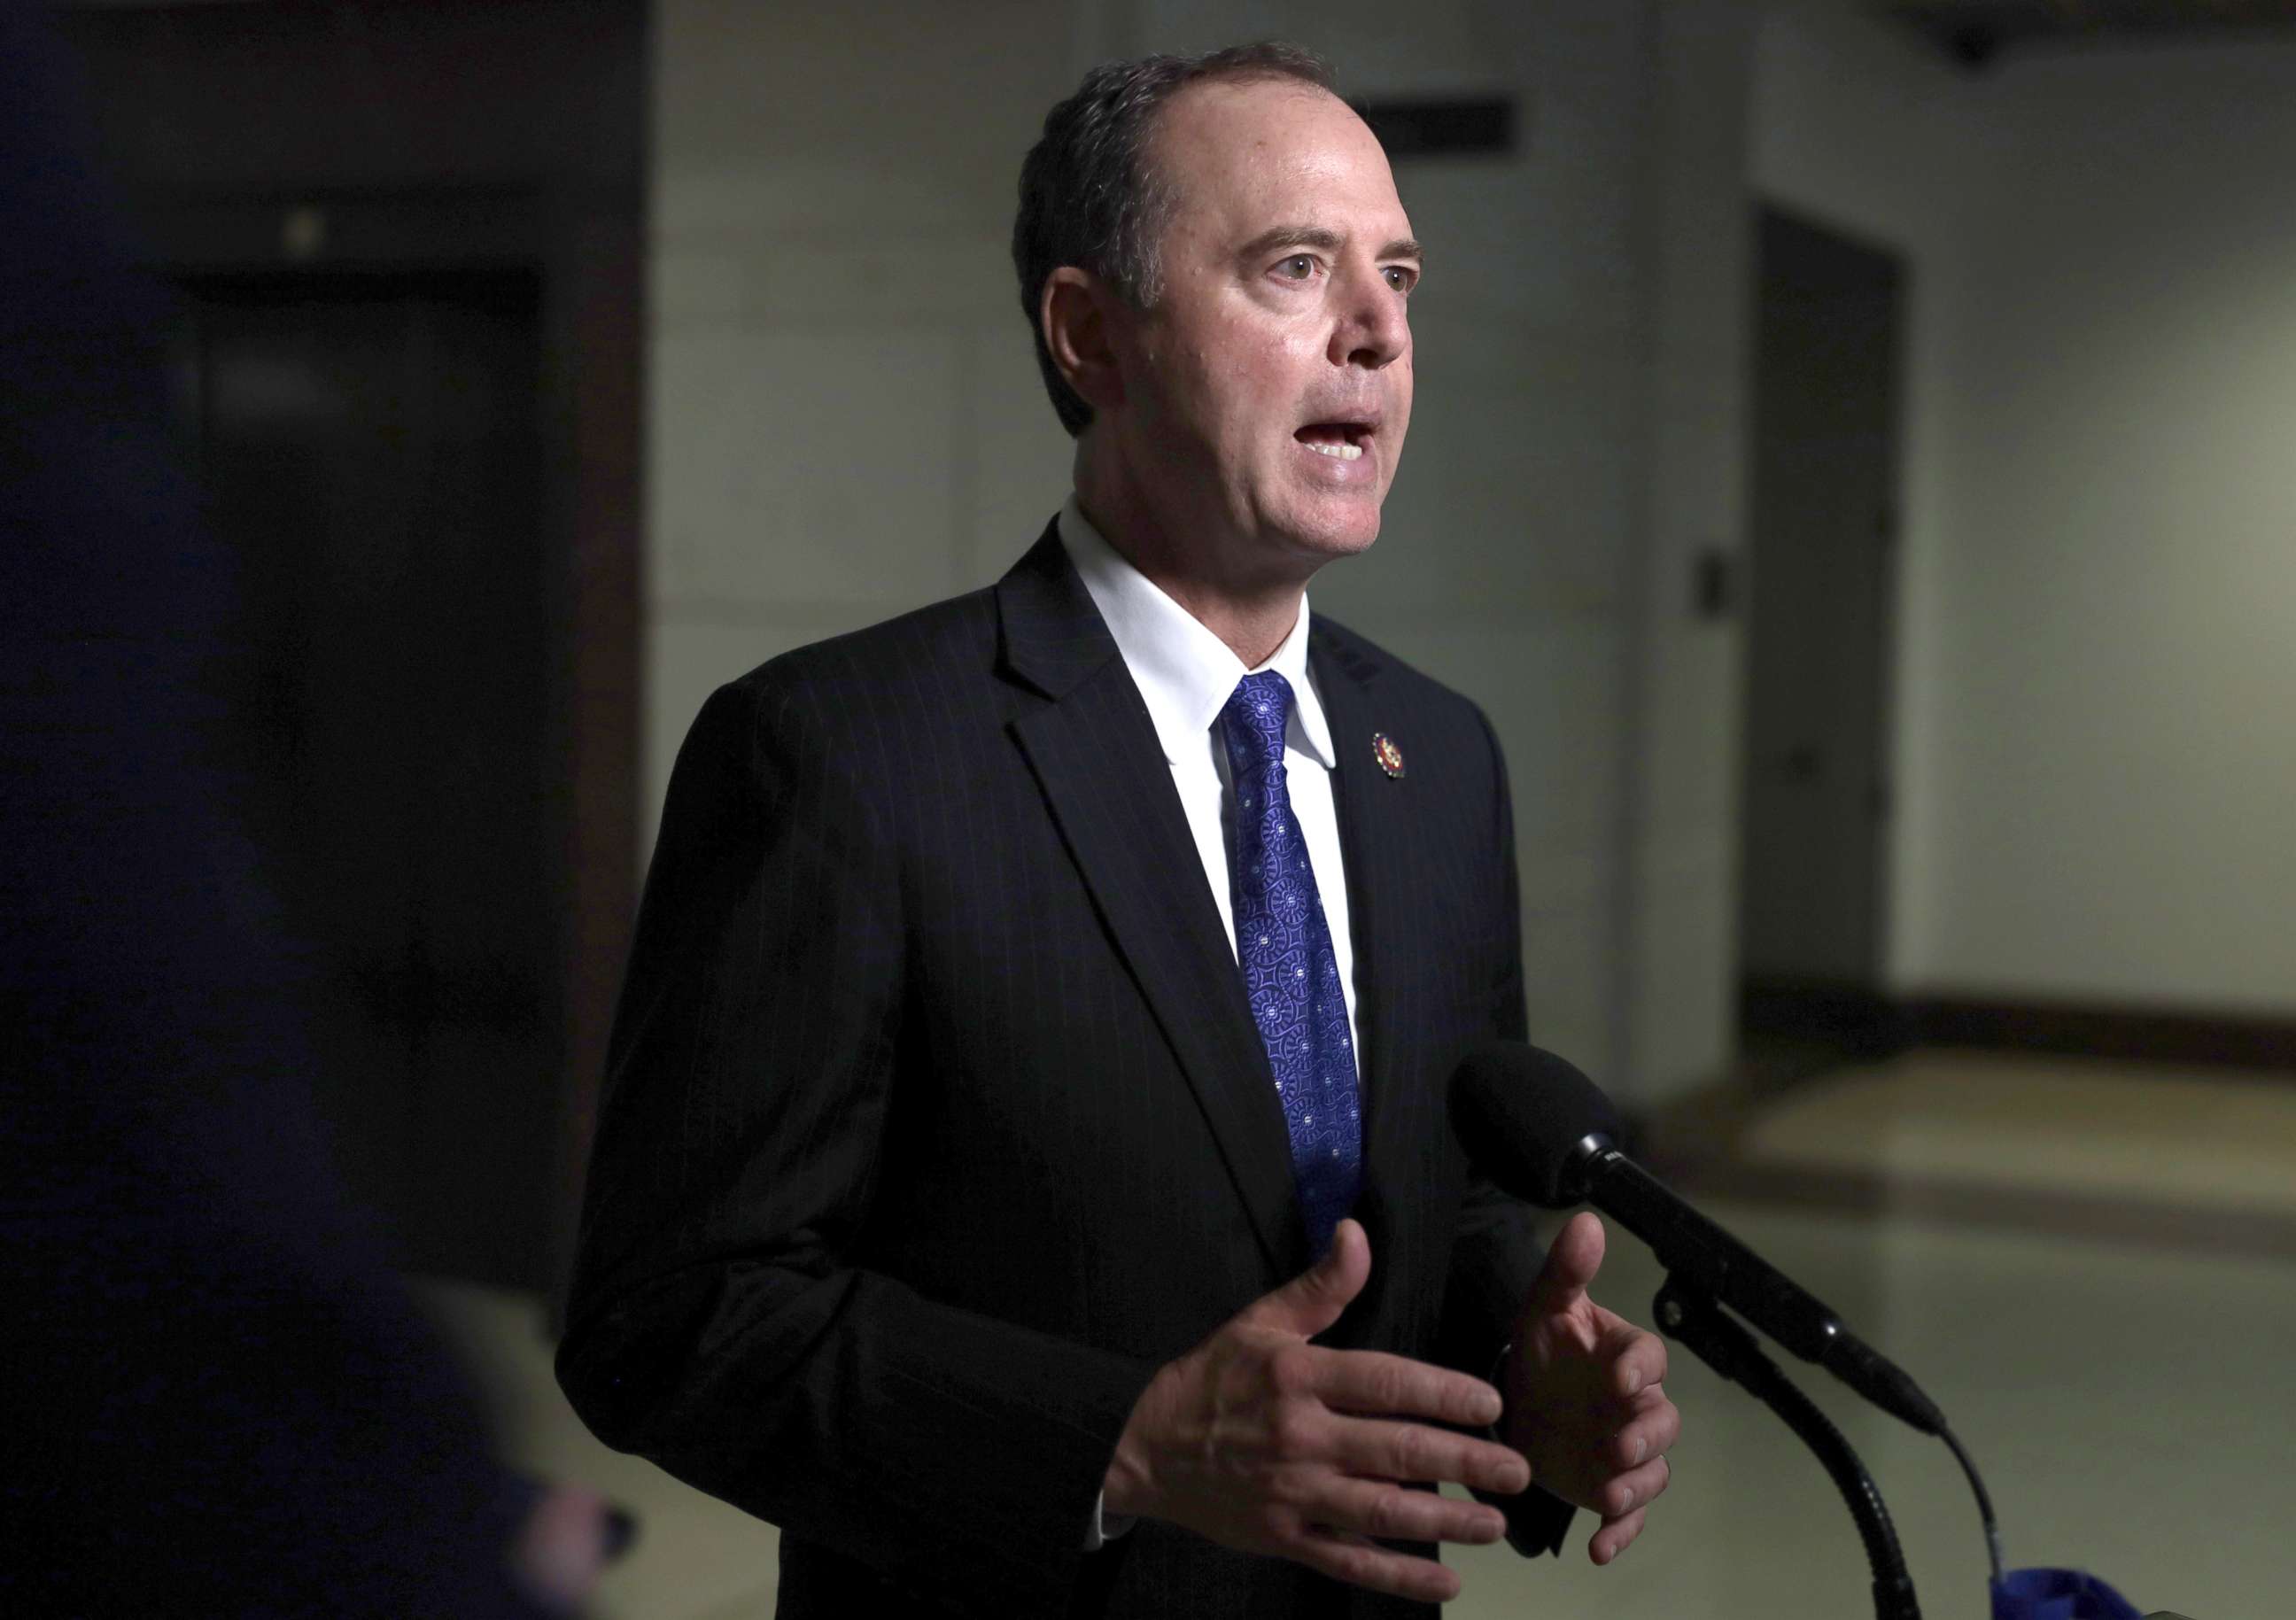 PHOTO: House Intelligence Committee Chairman Rep. Adam Schiff (D-CA) speaks to members of the media at the U.S. Capitol, Oct. 17, 2019, in Washington, DC.